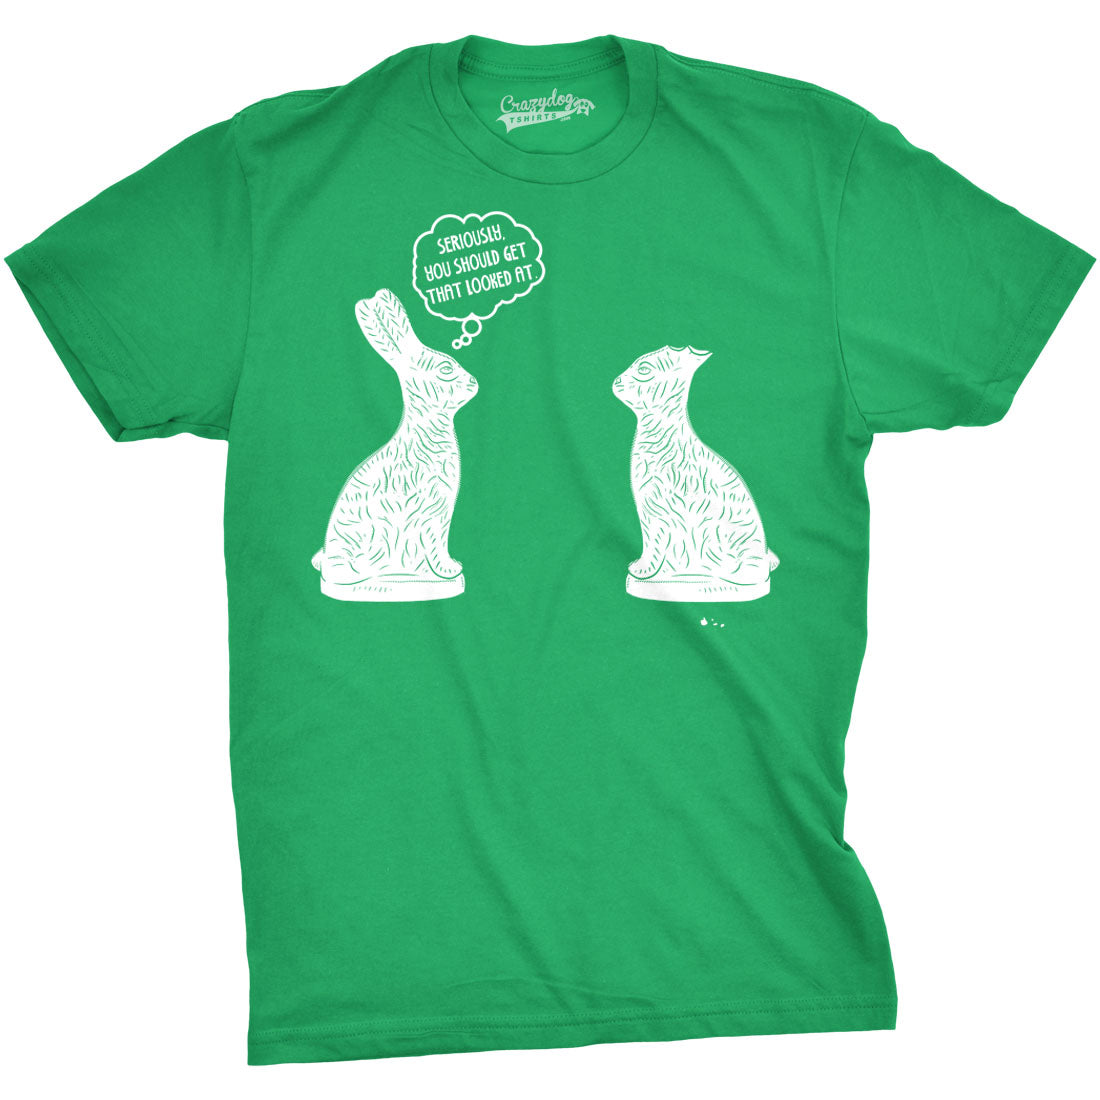 Funny Green You Should Get That Looked At Mens T Shirt Nerdy Easter Tee